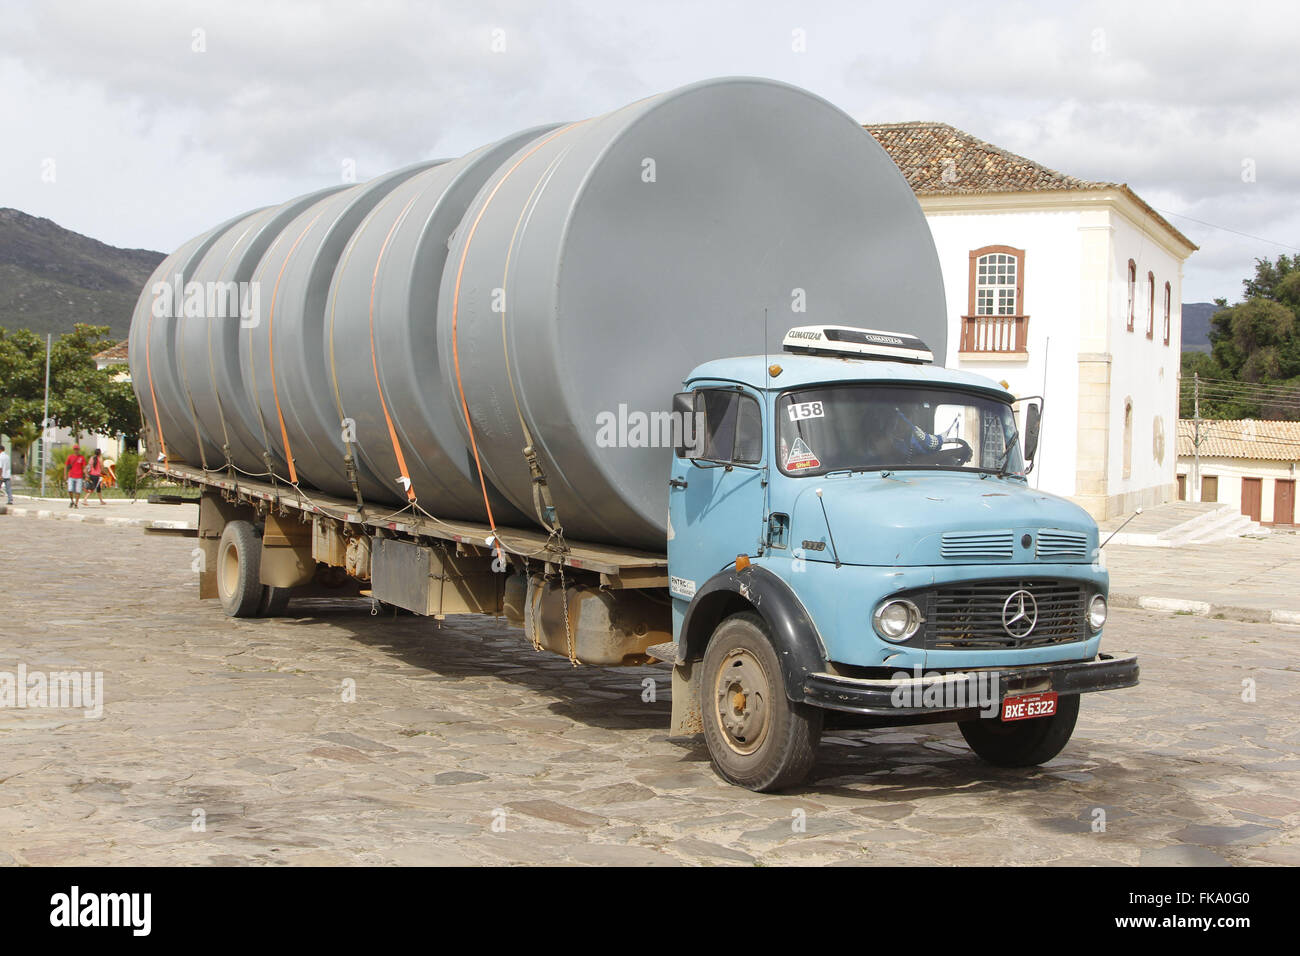 The truck with water tanks for All Program traveling in the city center Stock Photo